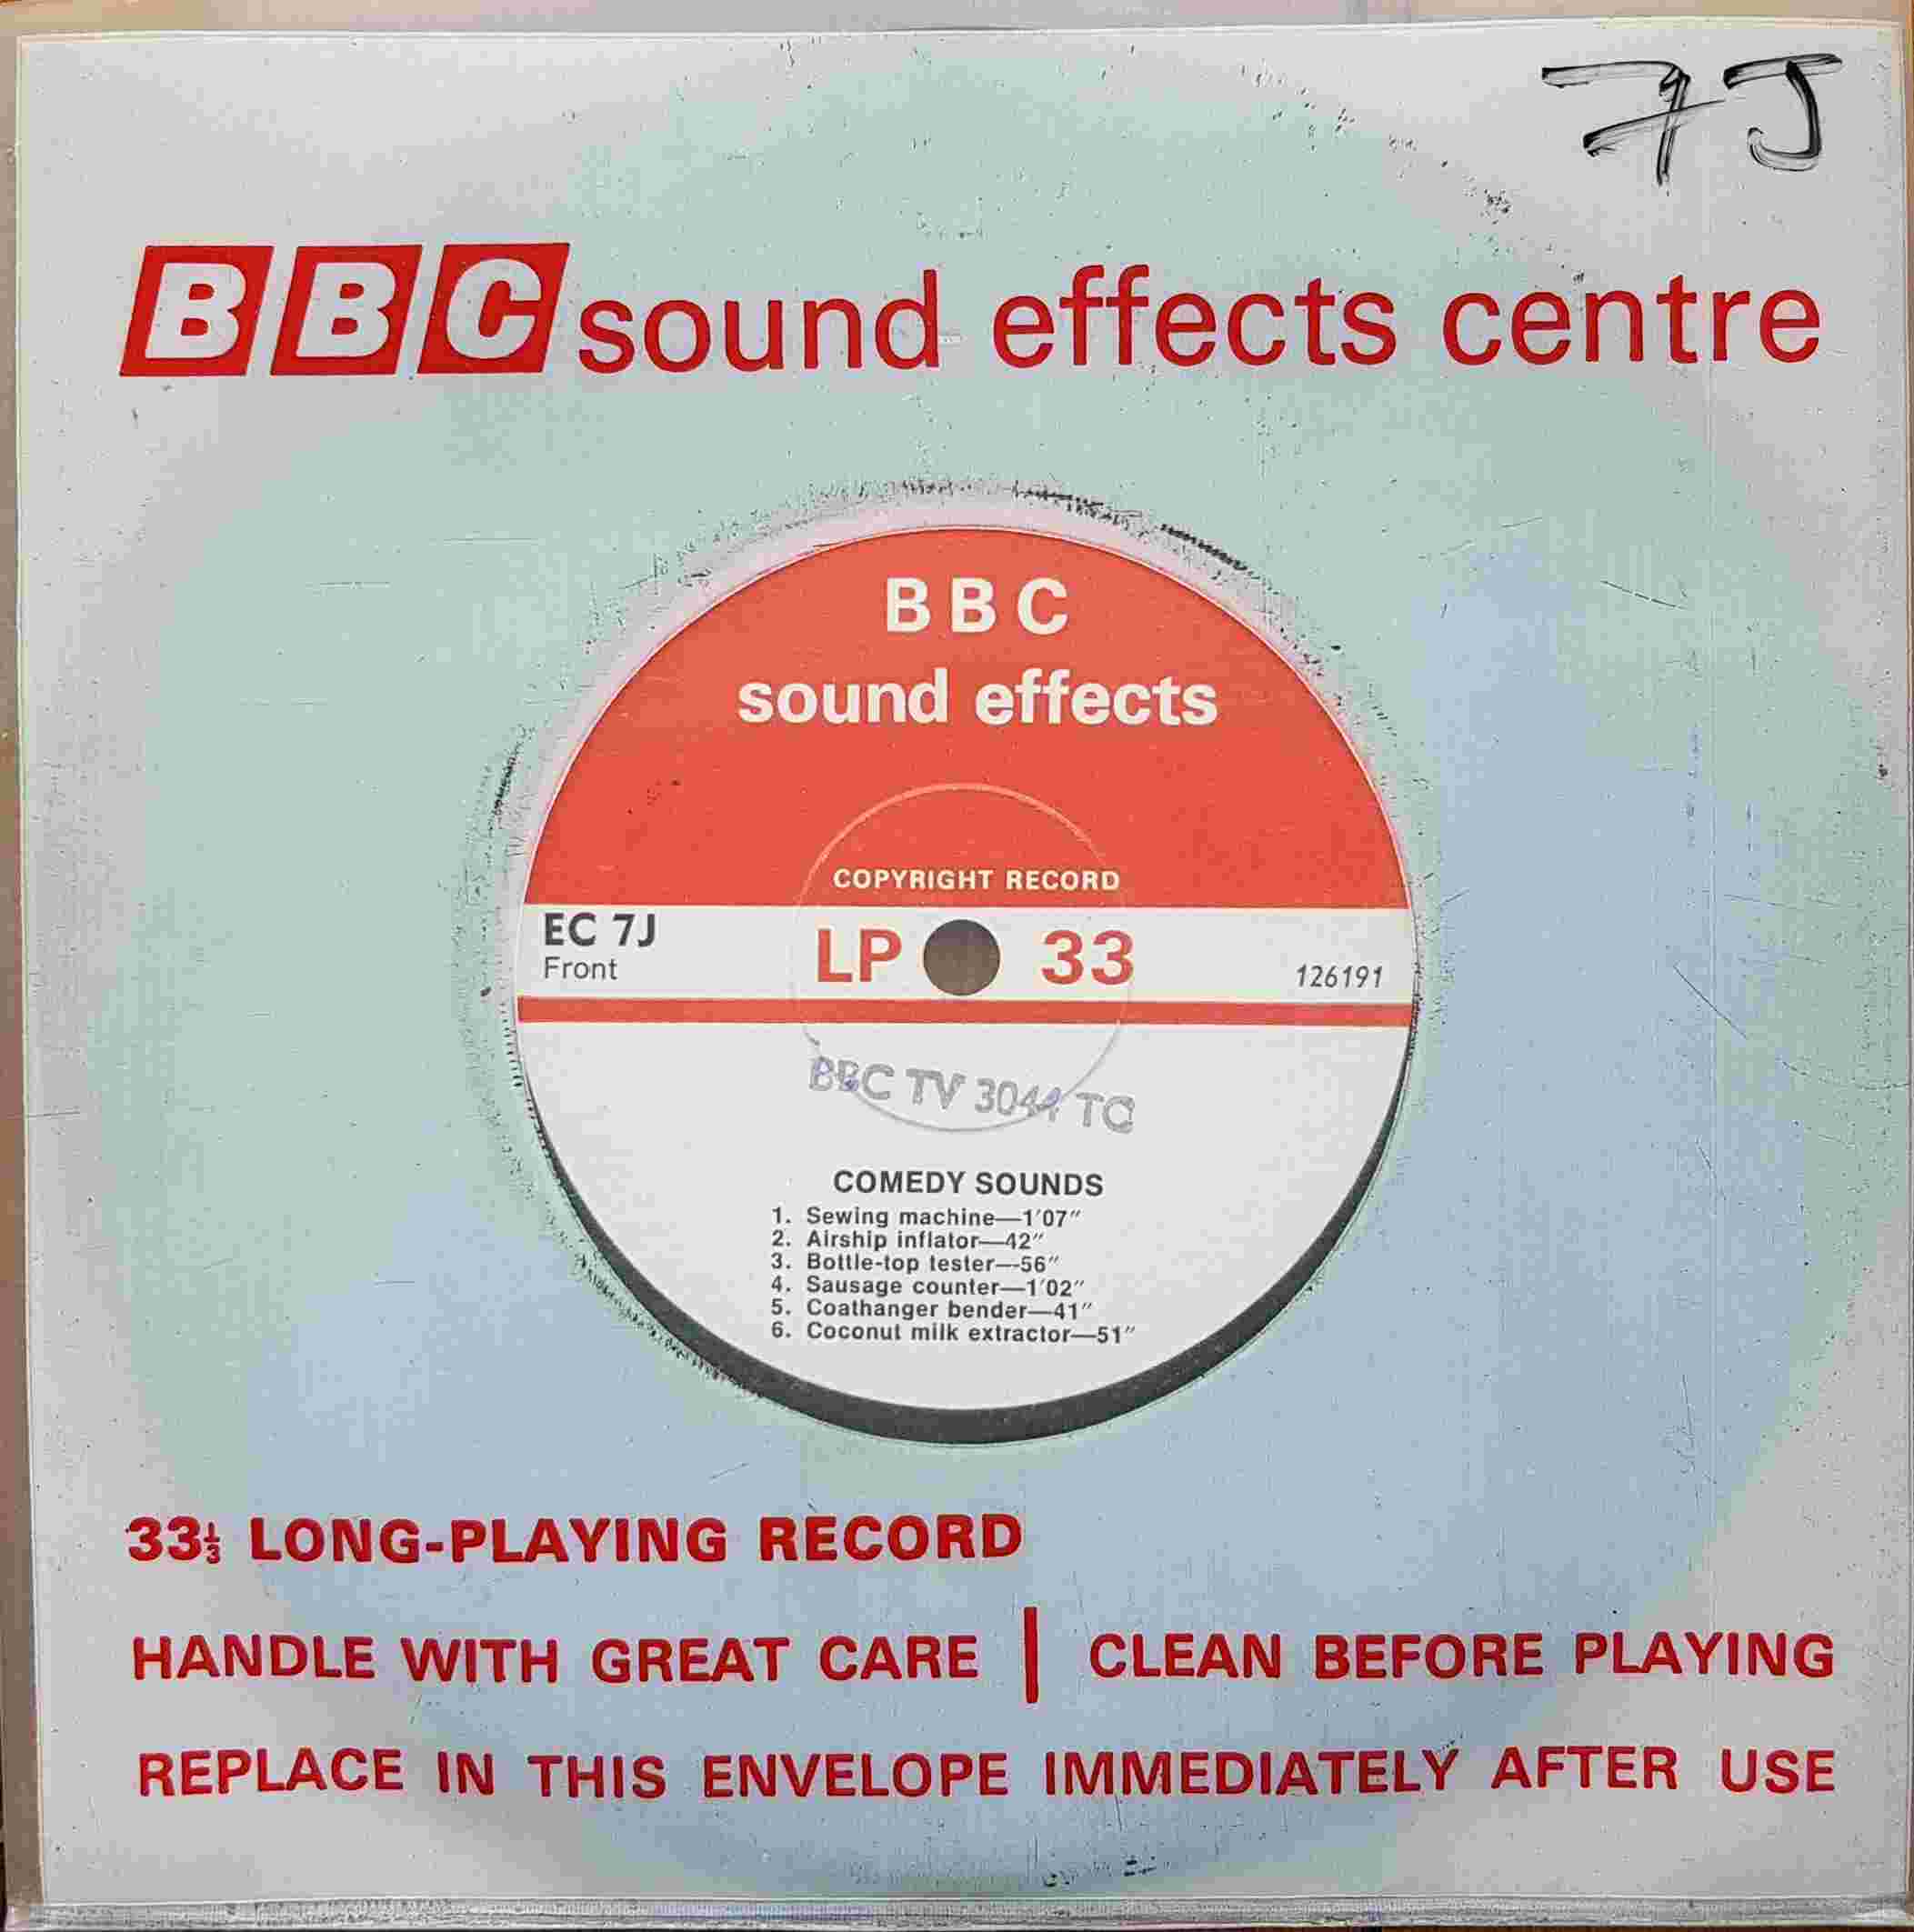 Picture of EC 7J Comedy sounds by artist Not registered from the BBC singles - Records and Tapes library